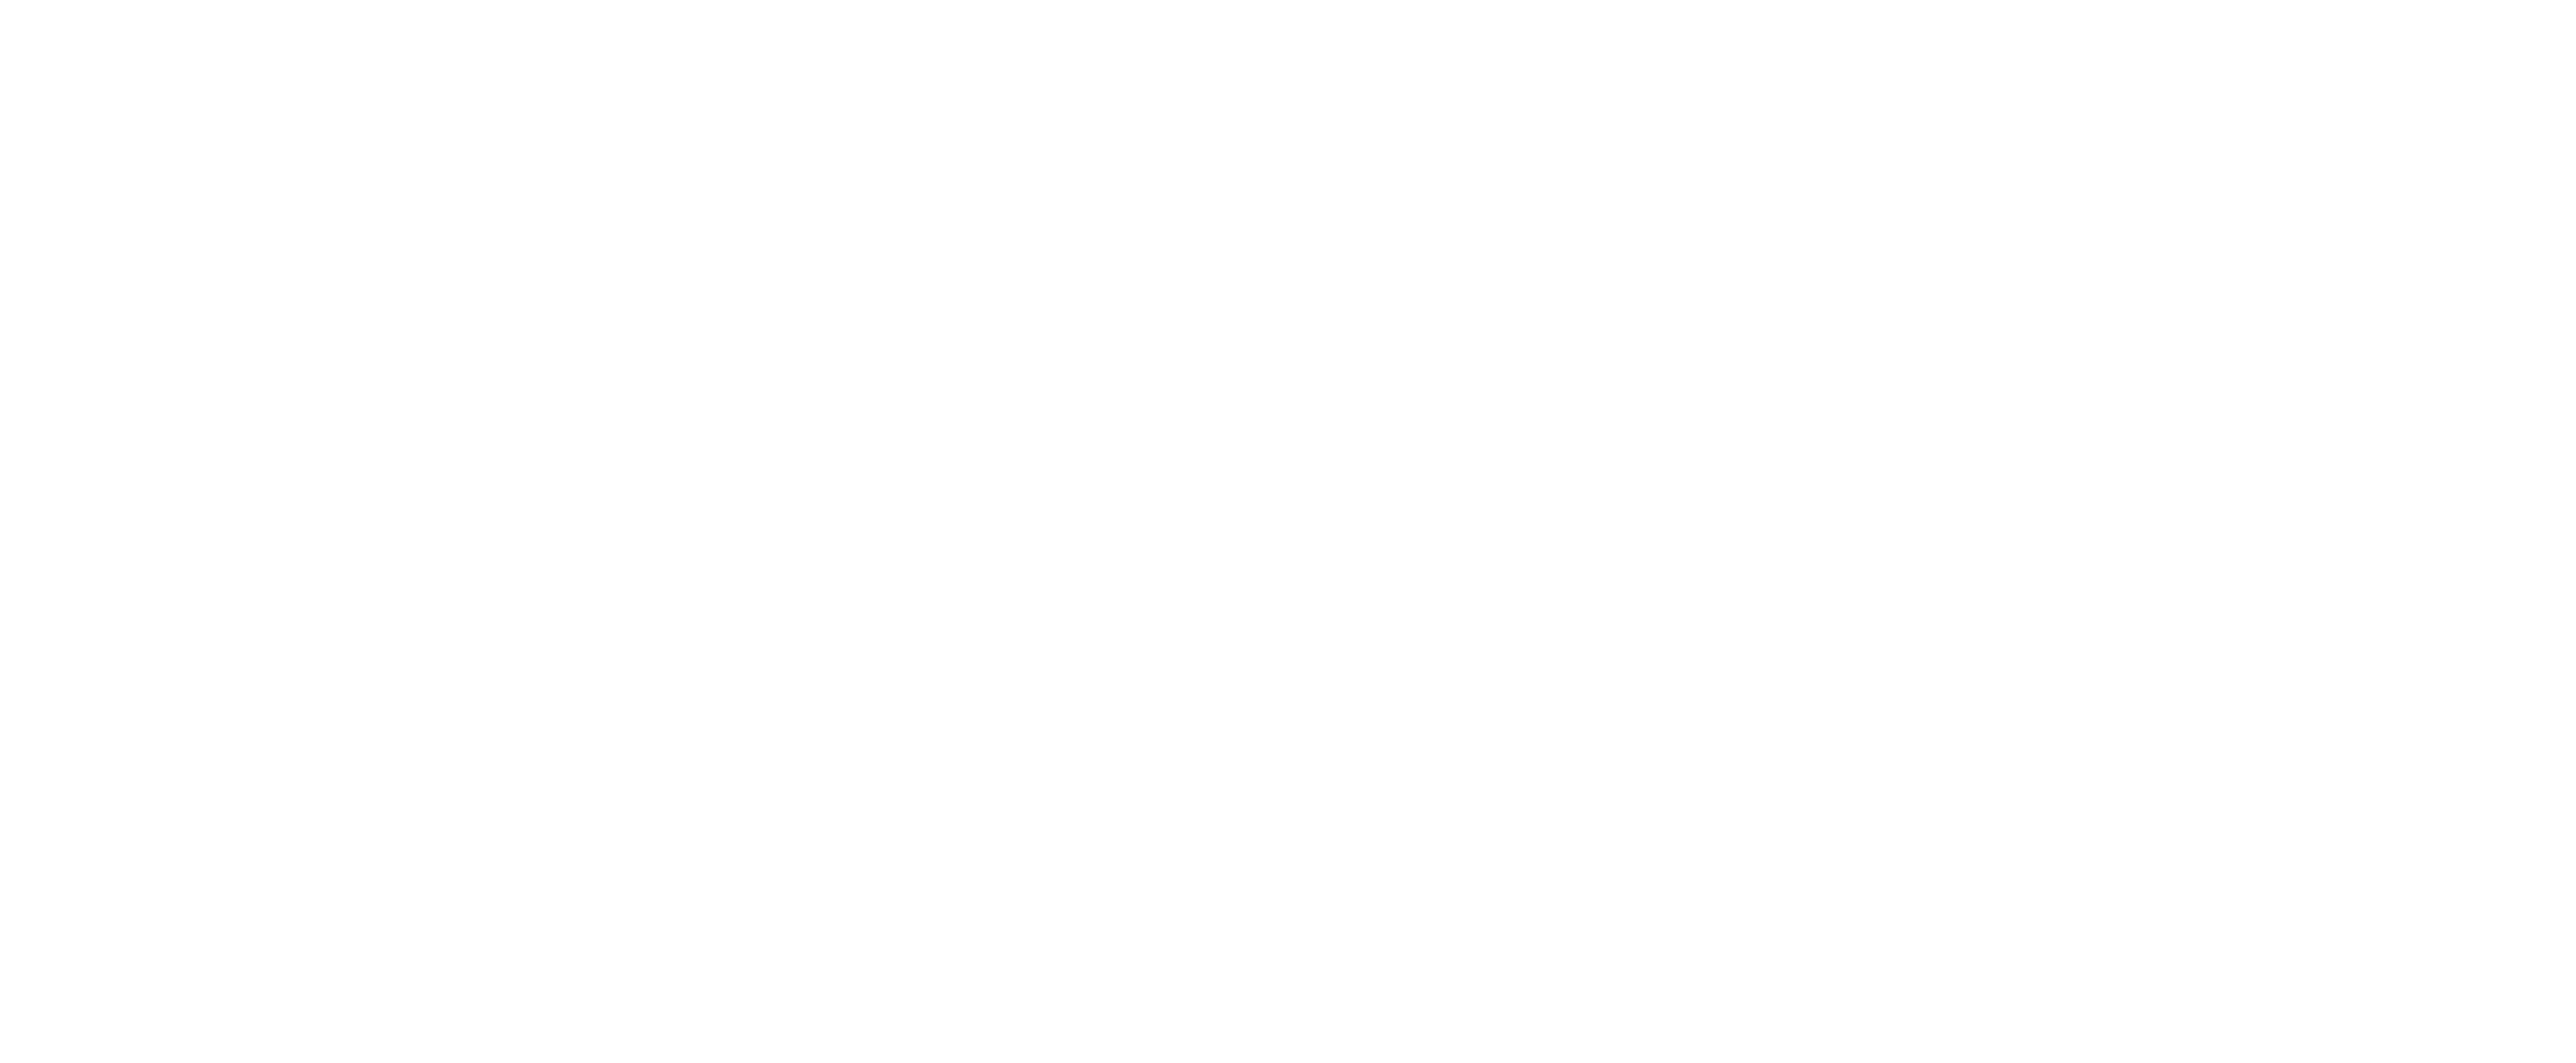 PG Flow Solutions